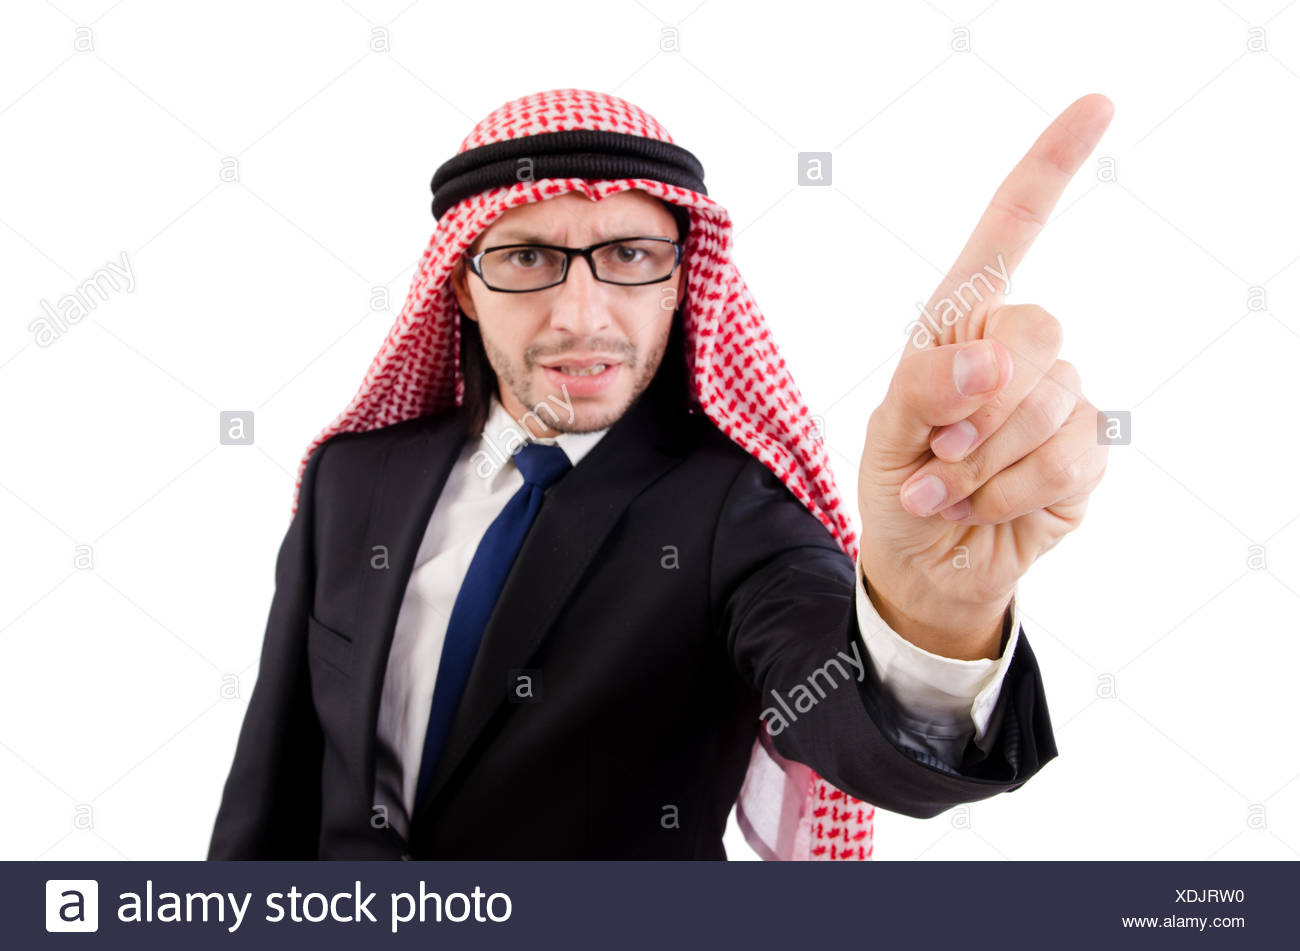 angry-arab-man-in-specs-isolated-on-white-XDJRW0.jpg